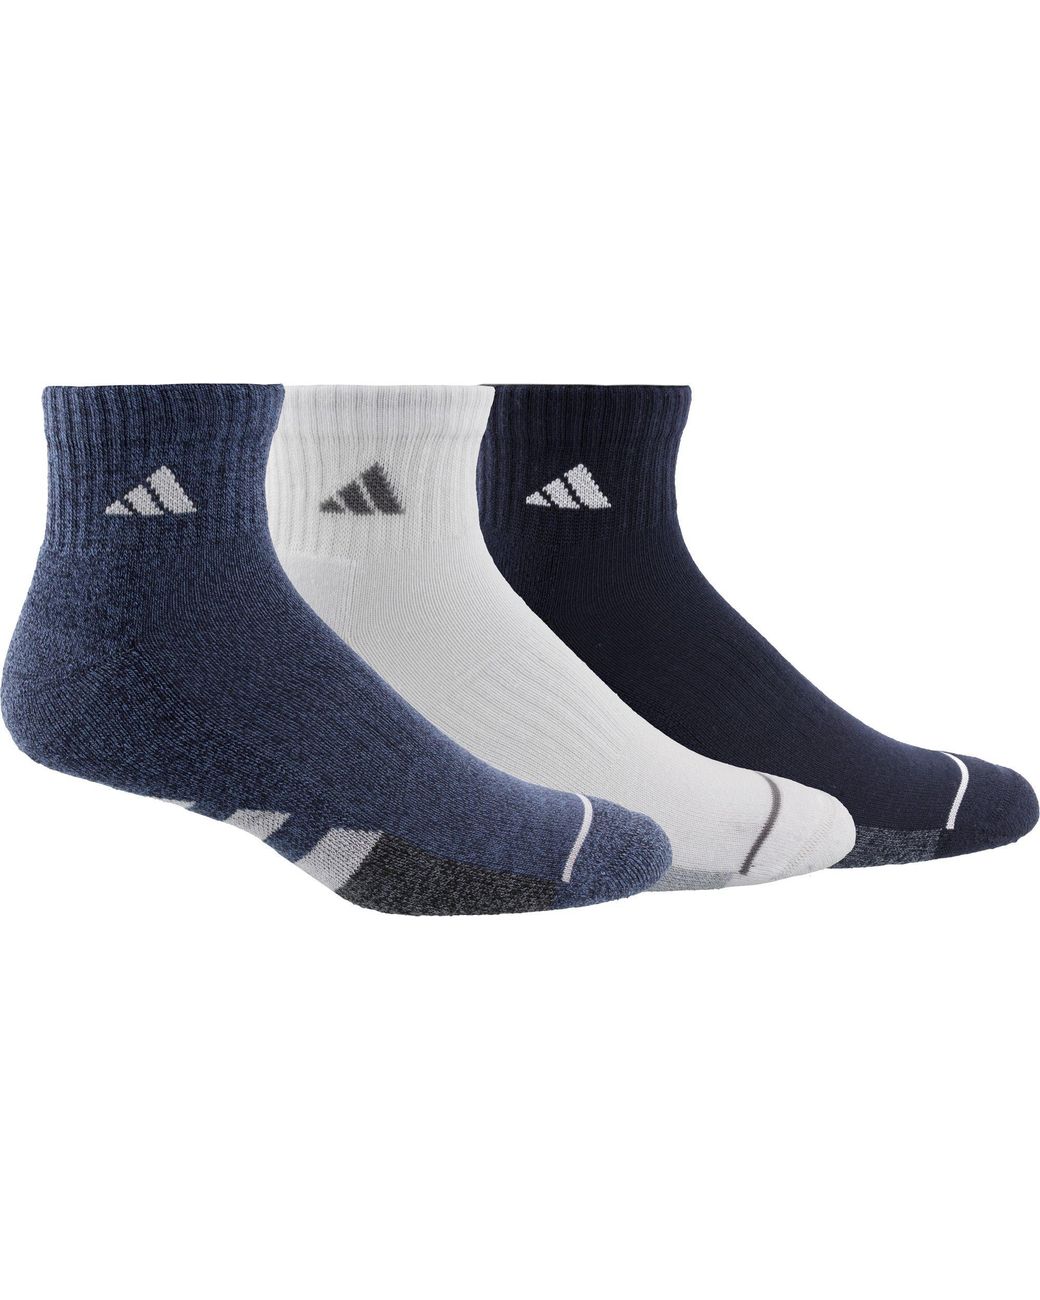 adidas Cushioned Ii Color Quarter Socks - 3 Pack in Blue for Men - Lyst